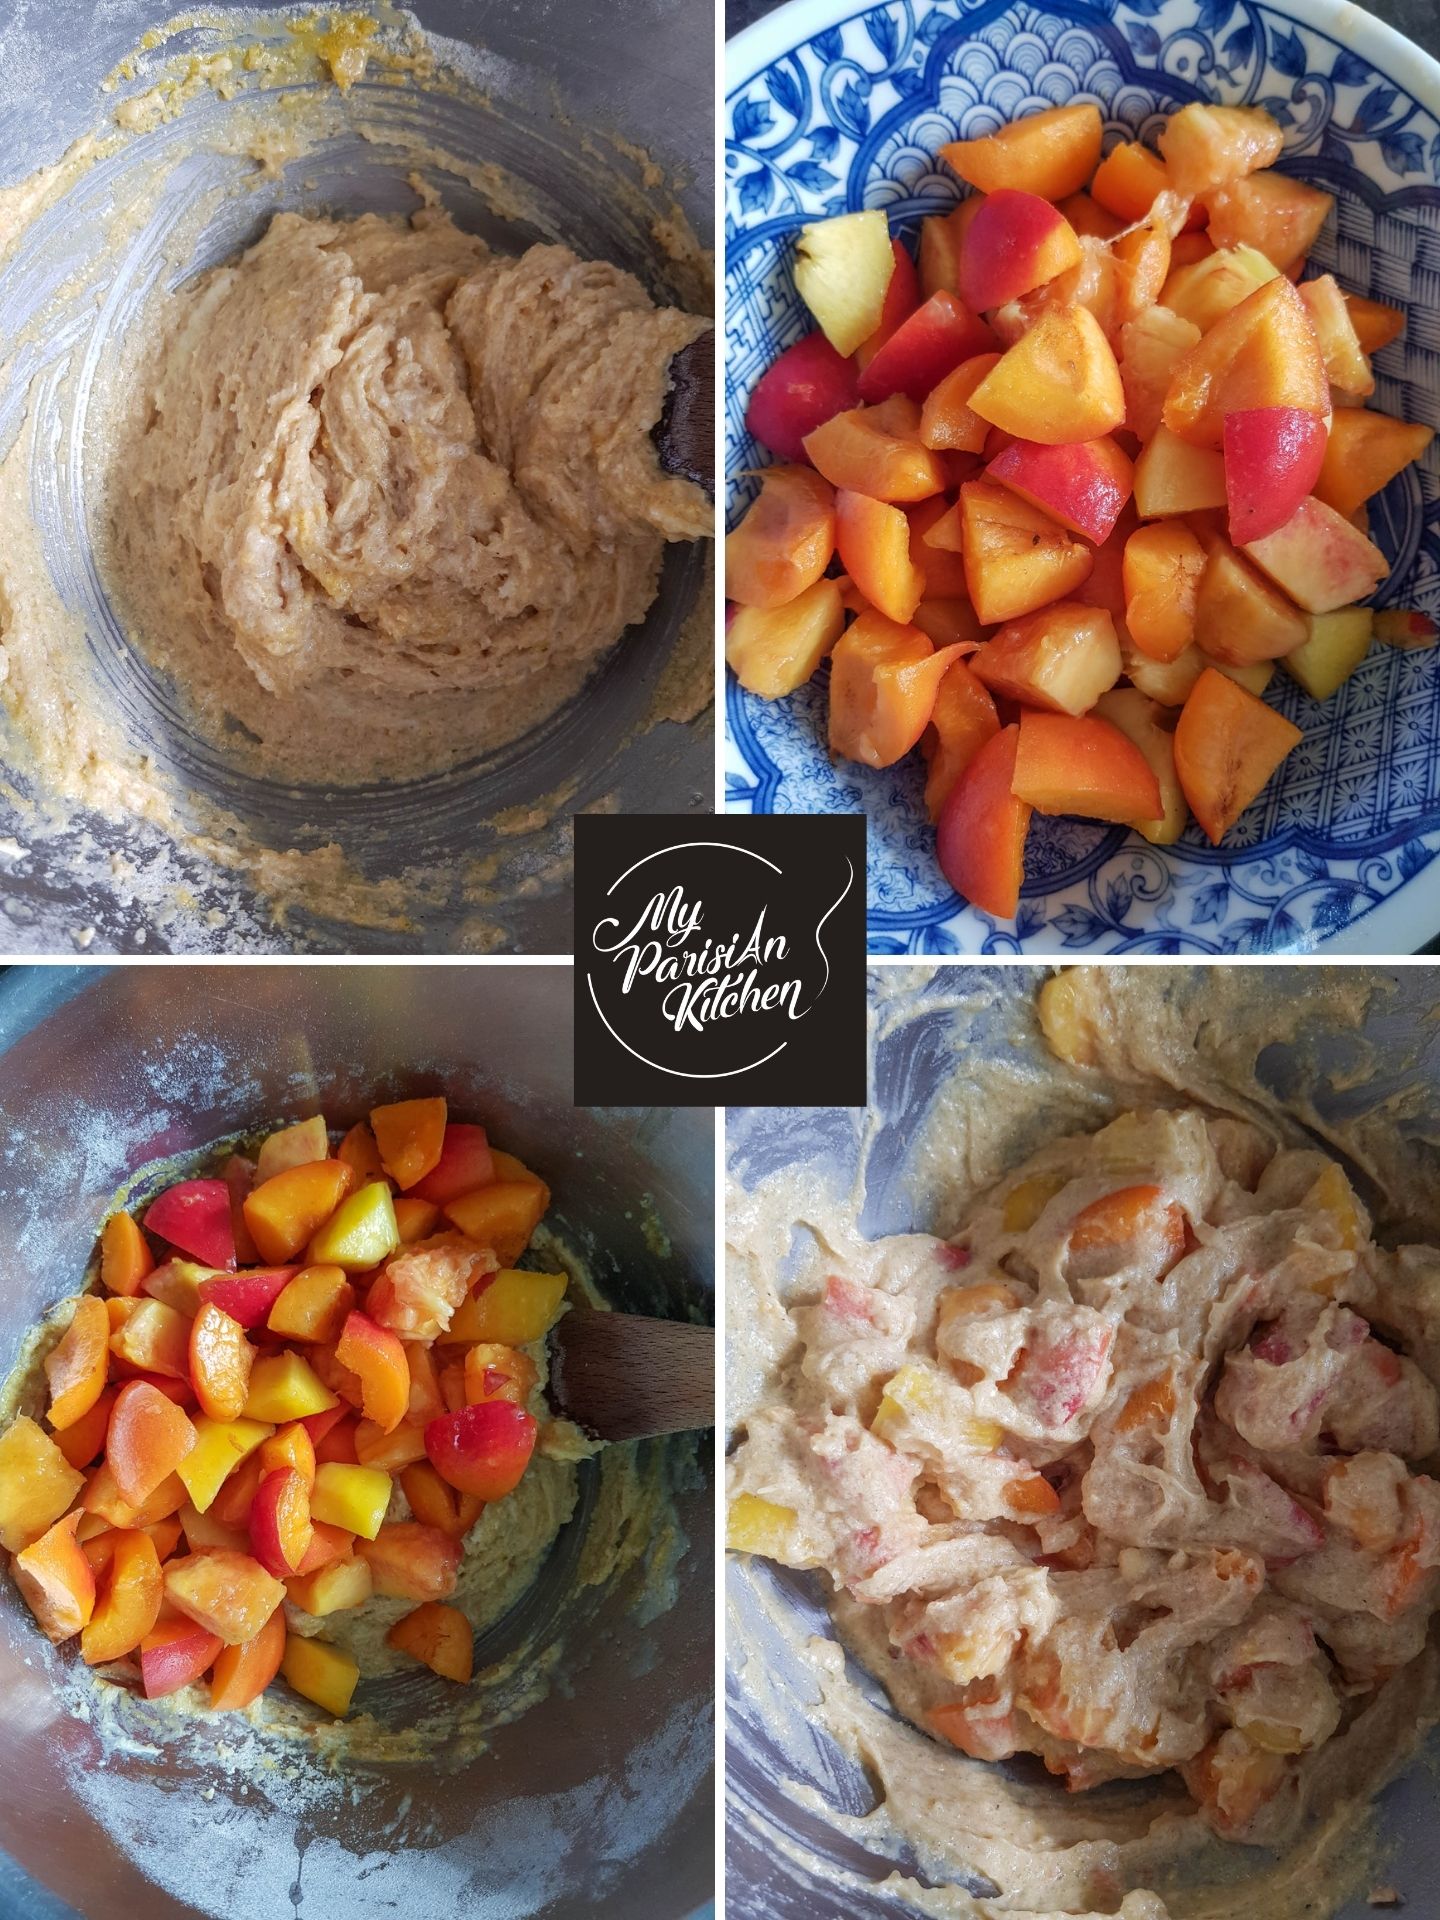 French peach and apricot moelleux cake step by step